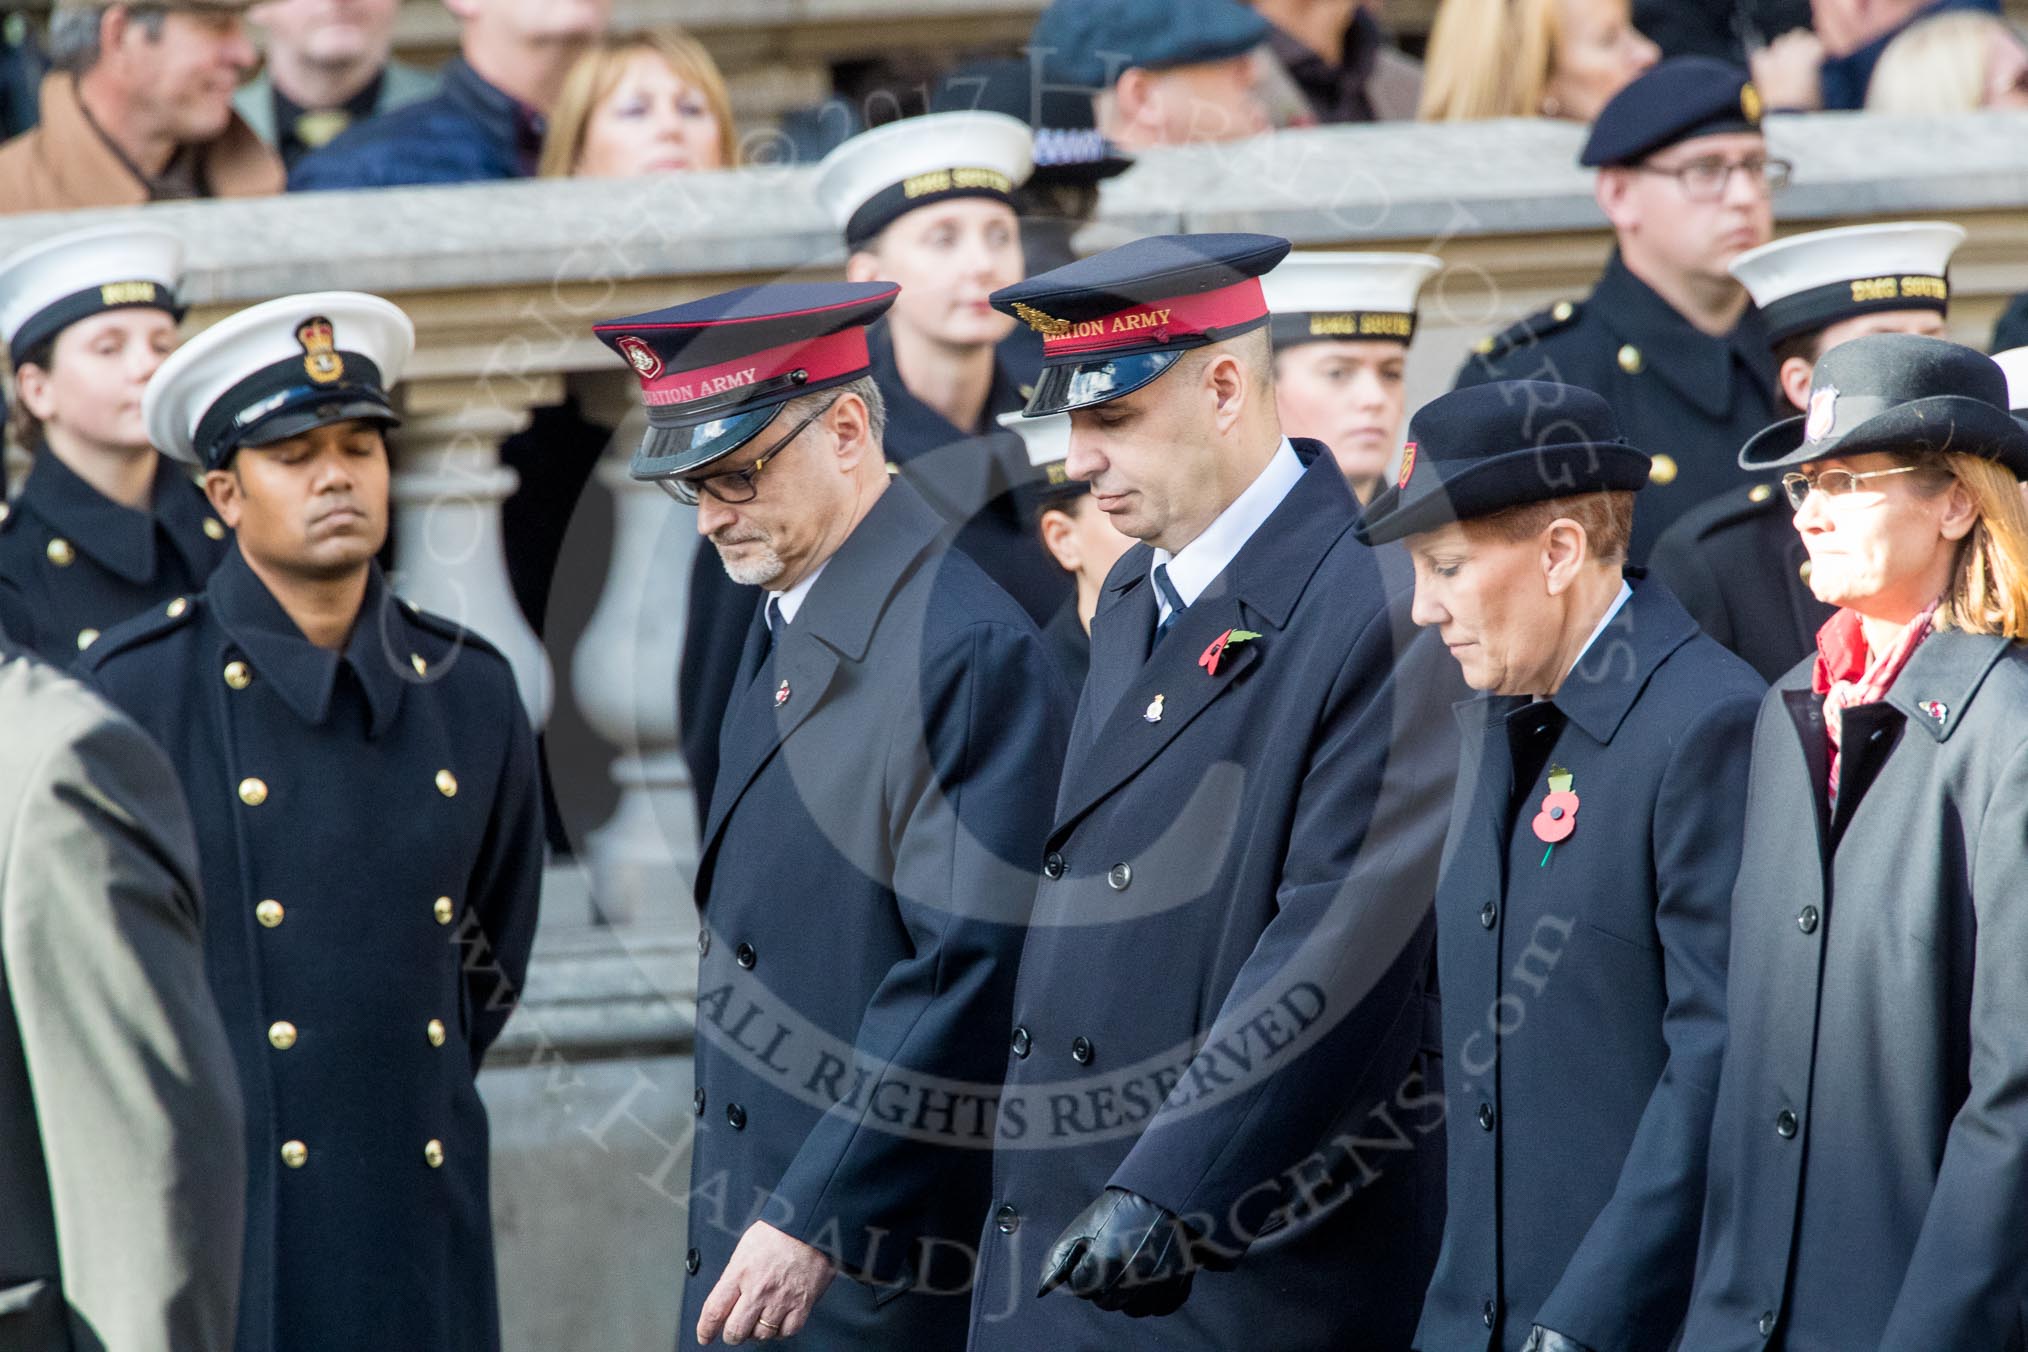 The Salvation Army (Group M6, 30 members) during the Royal British Legion March Past on Remembrance Sunday at the Cenotaph, Whitehall, Westminster, London, 11 November 2018, 12:25.